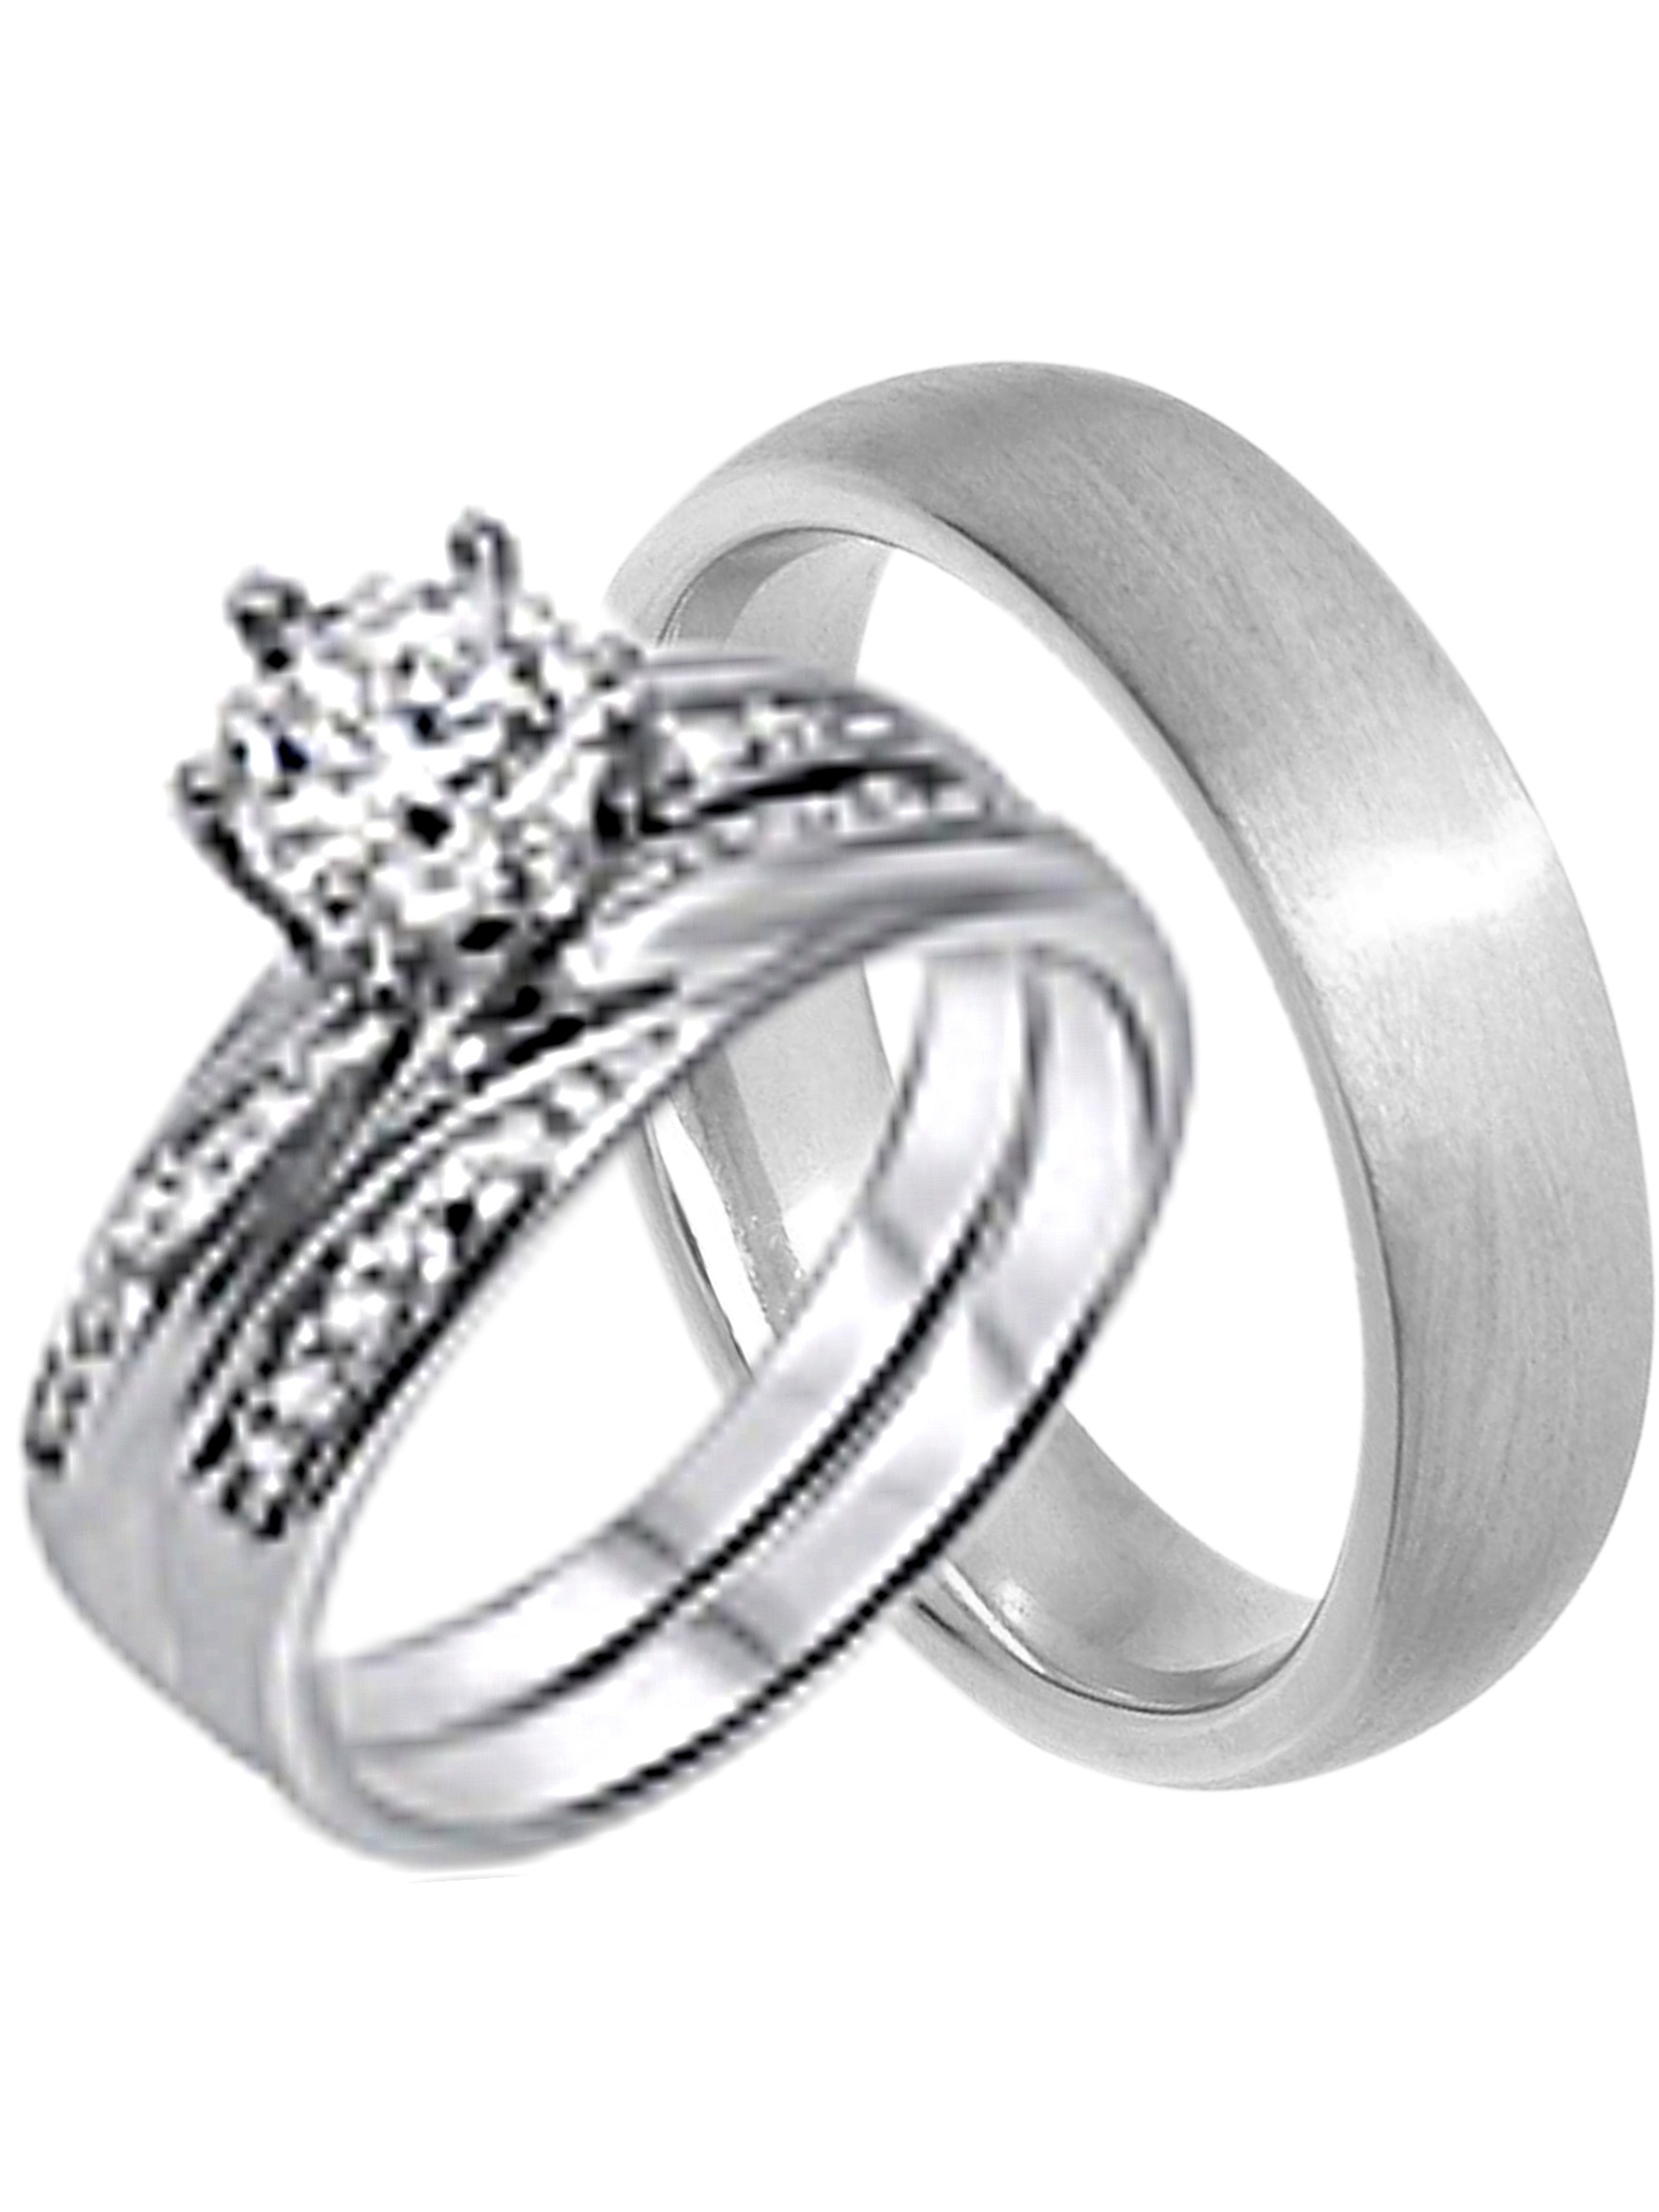 Wedding Band Sets For Him And Her
 His and Hers Wedding Ring Set Cheap Wedding Bands for Him